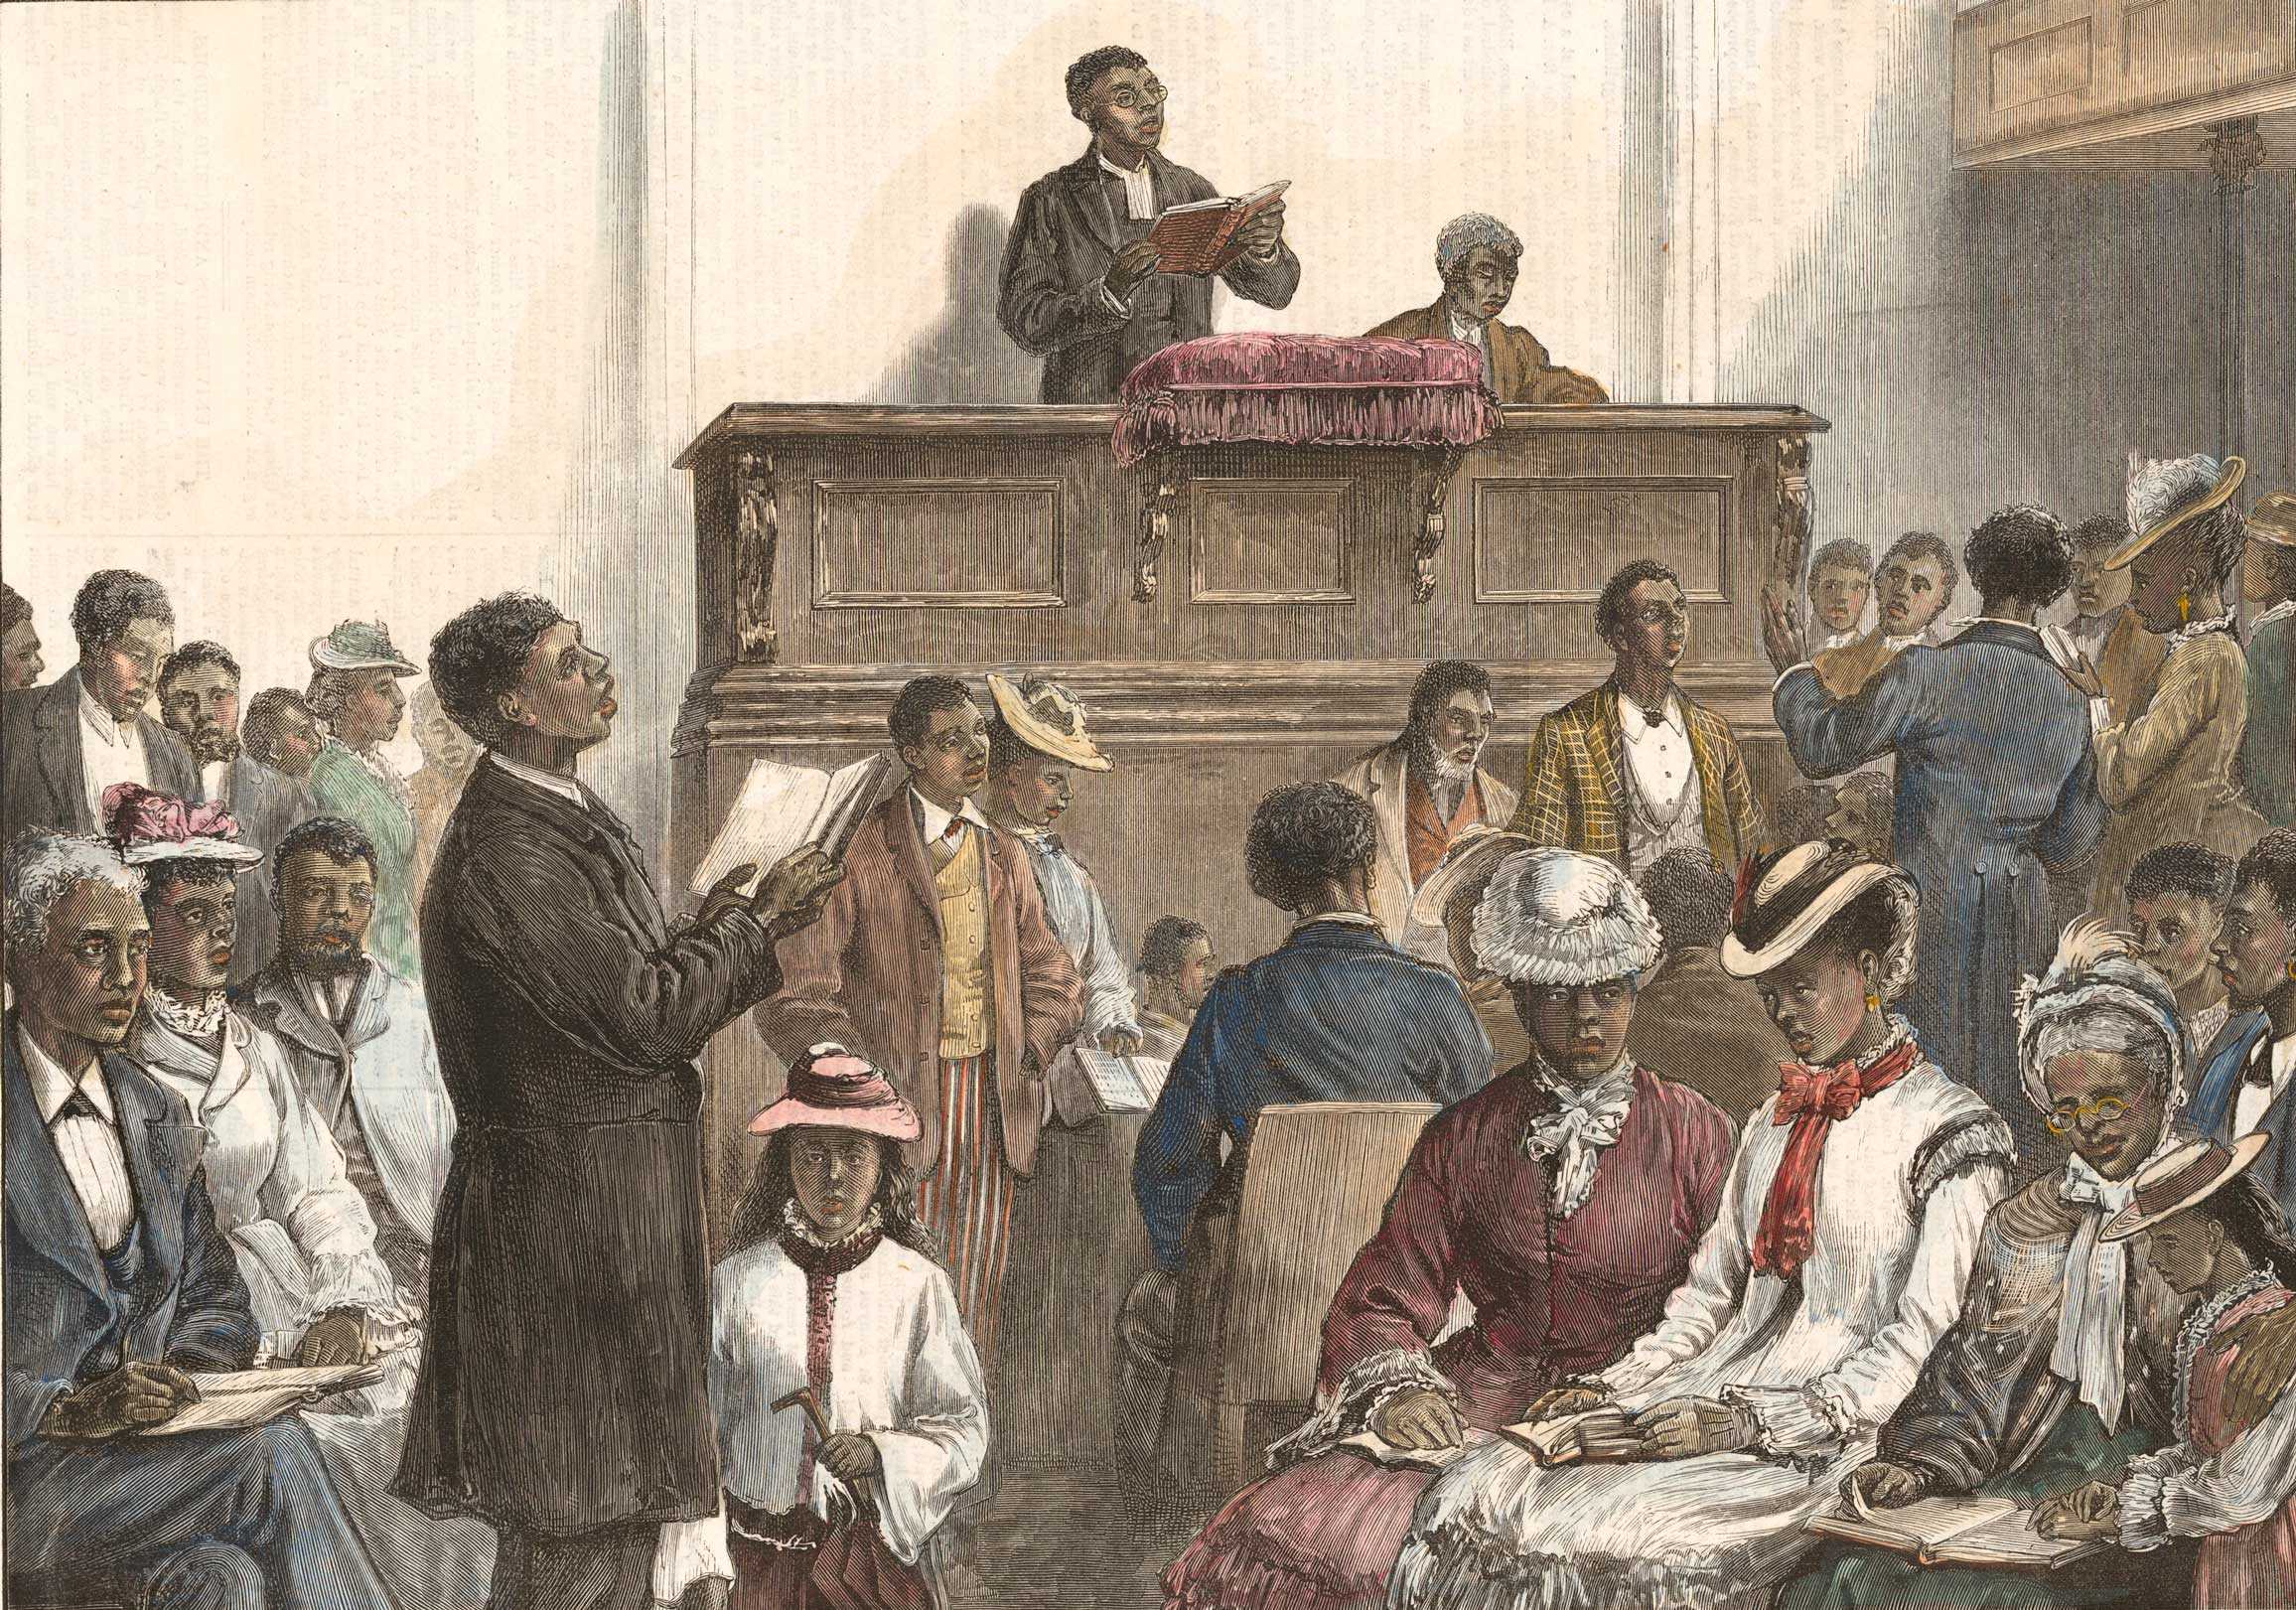 A black man on a large podium with a book in his hand who is speaking to a large congregation